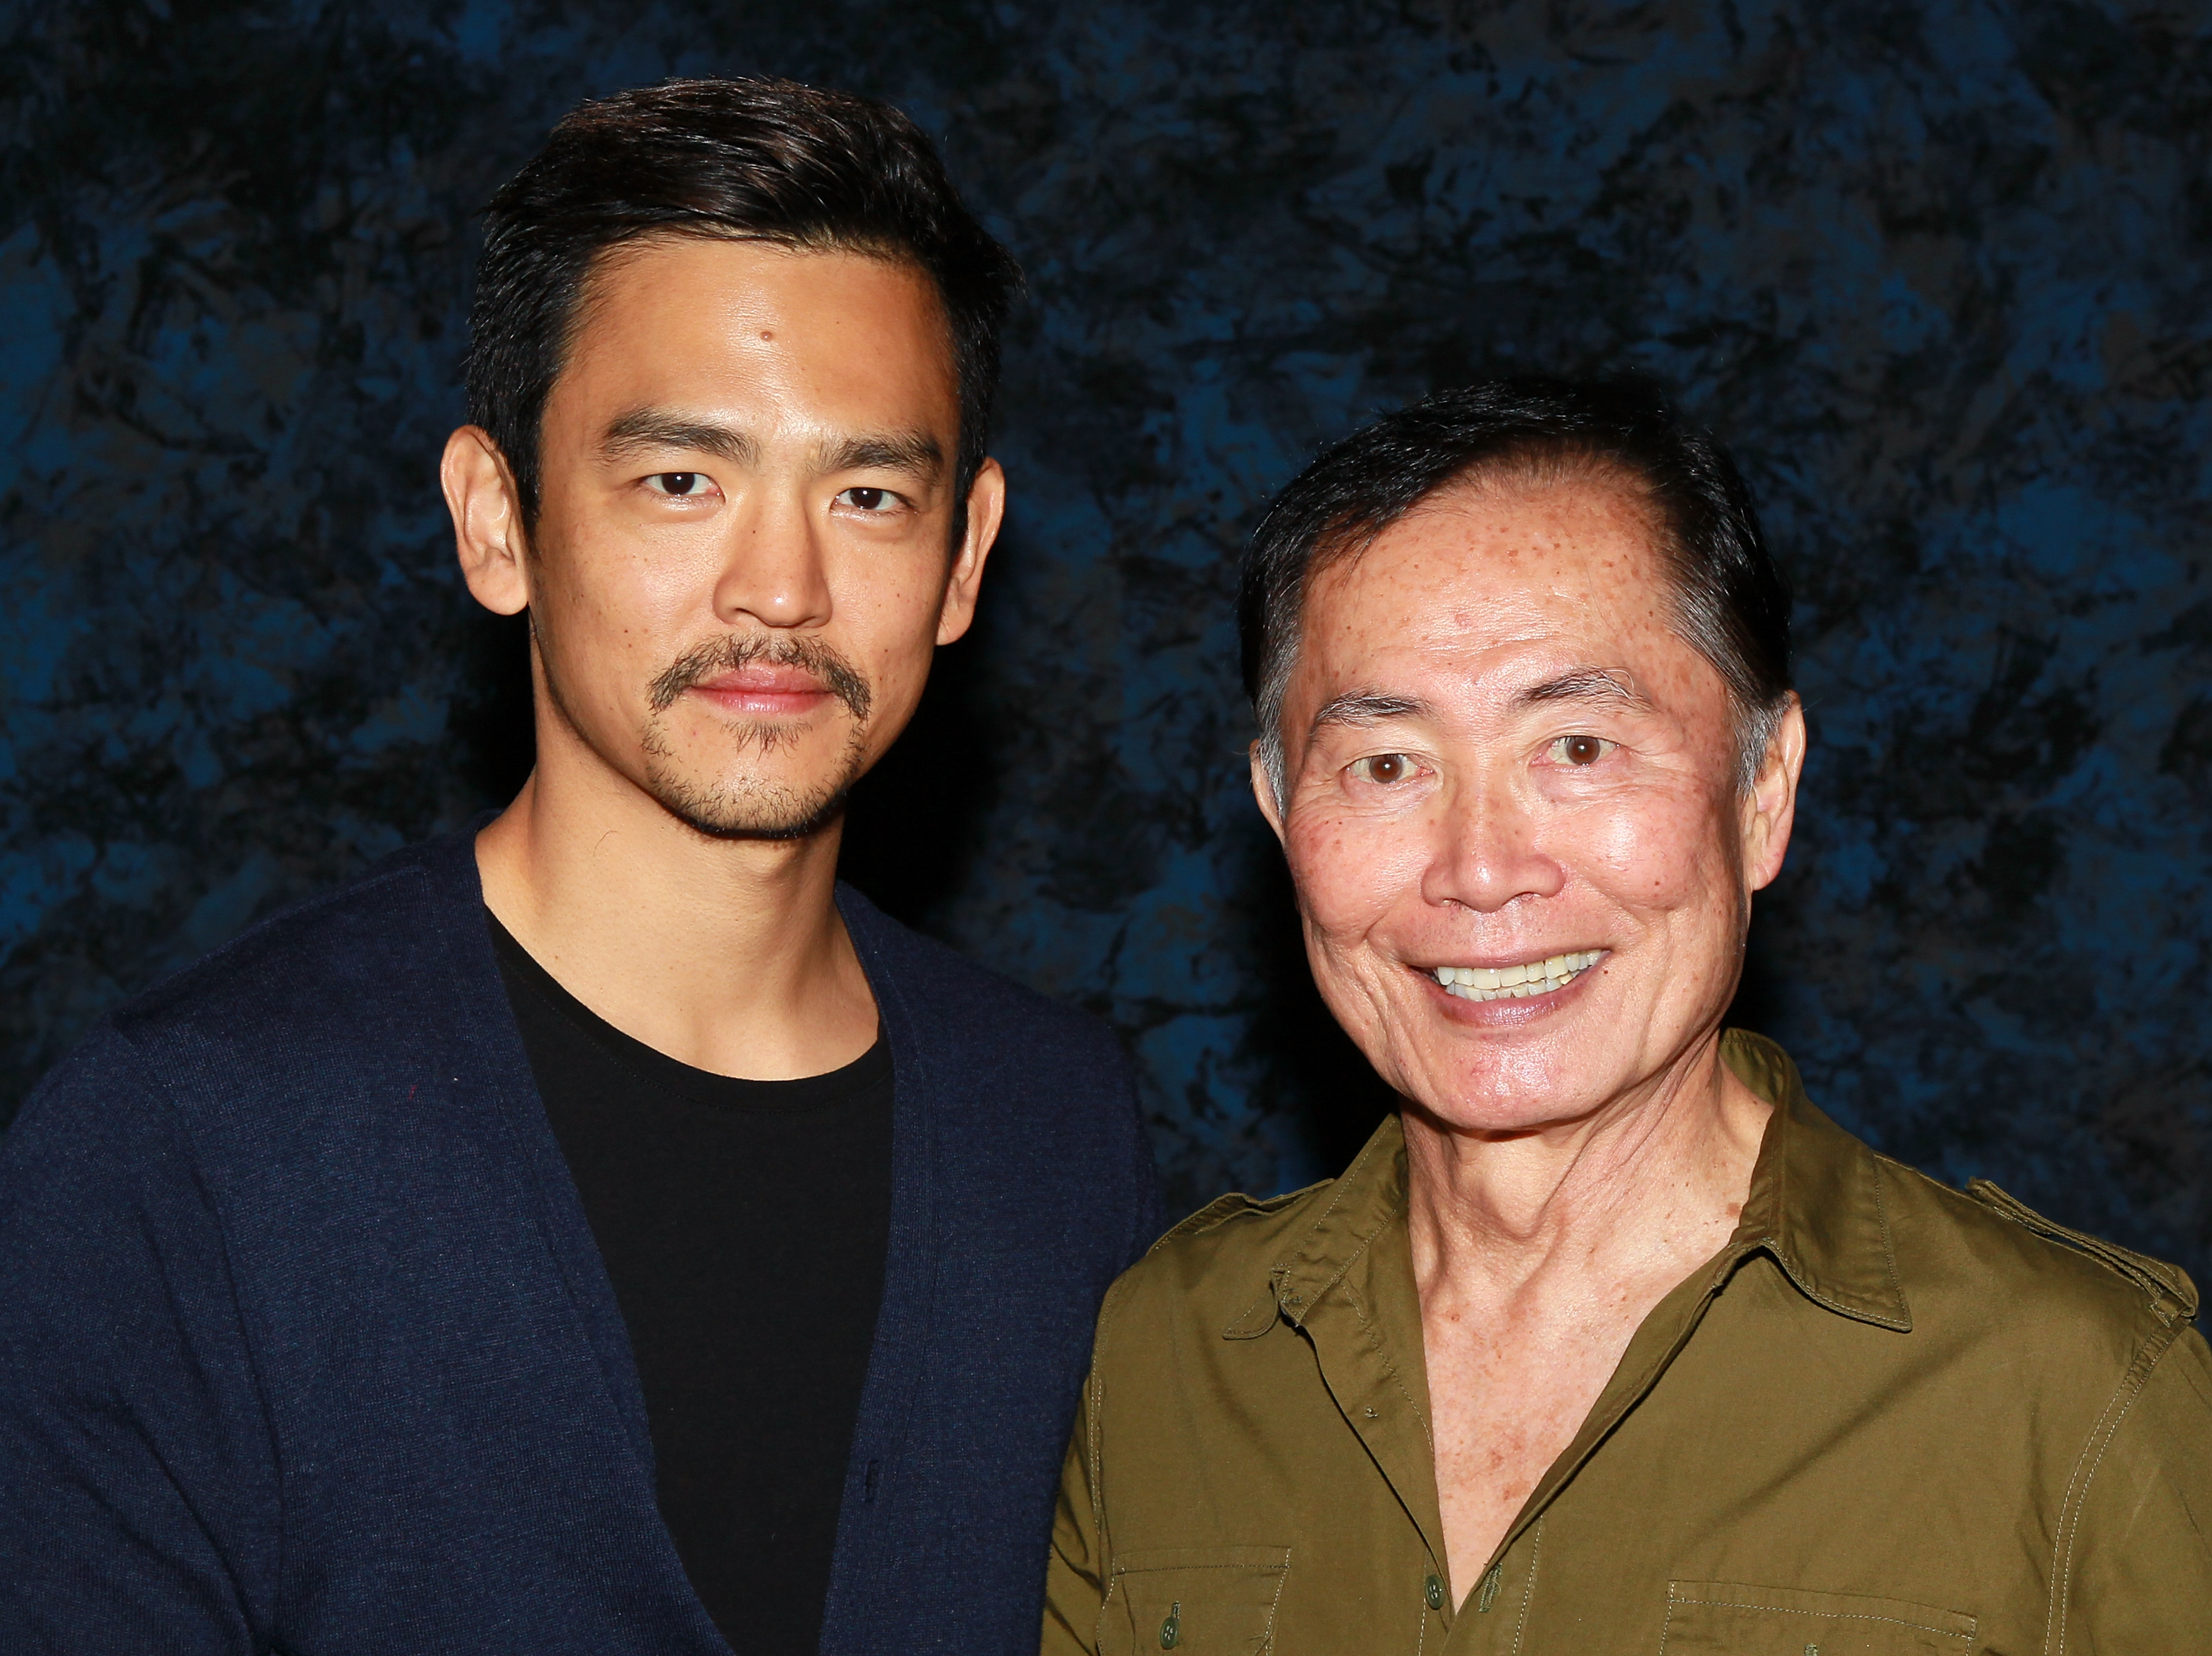 John Cho (L) and George Takei attend the Official Star Trek Convention on August 14, 2011 in Las Vegas, Nevada.